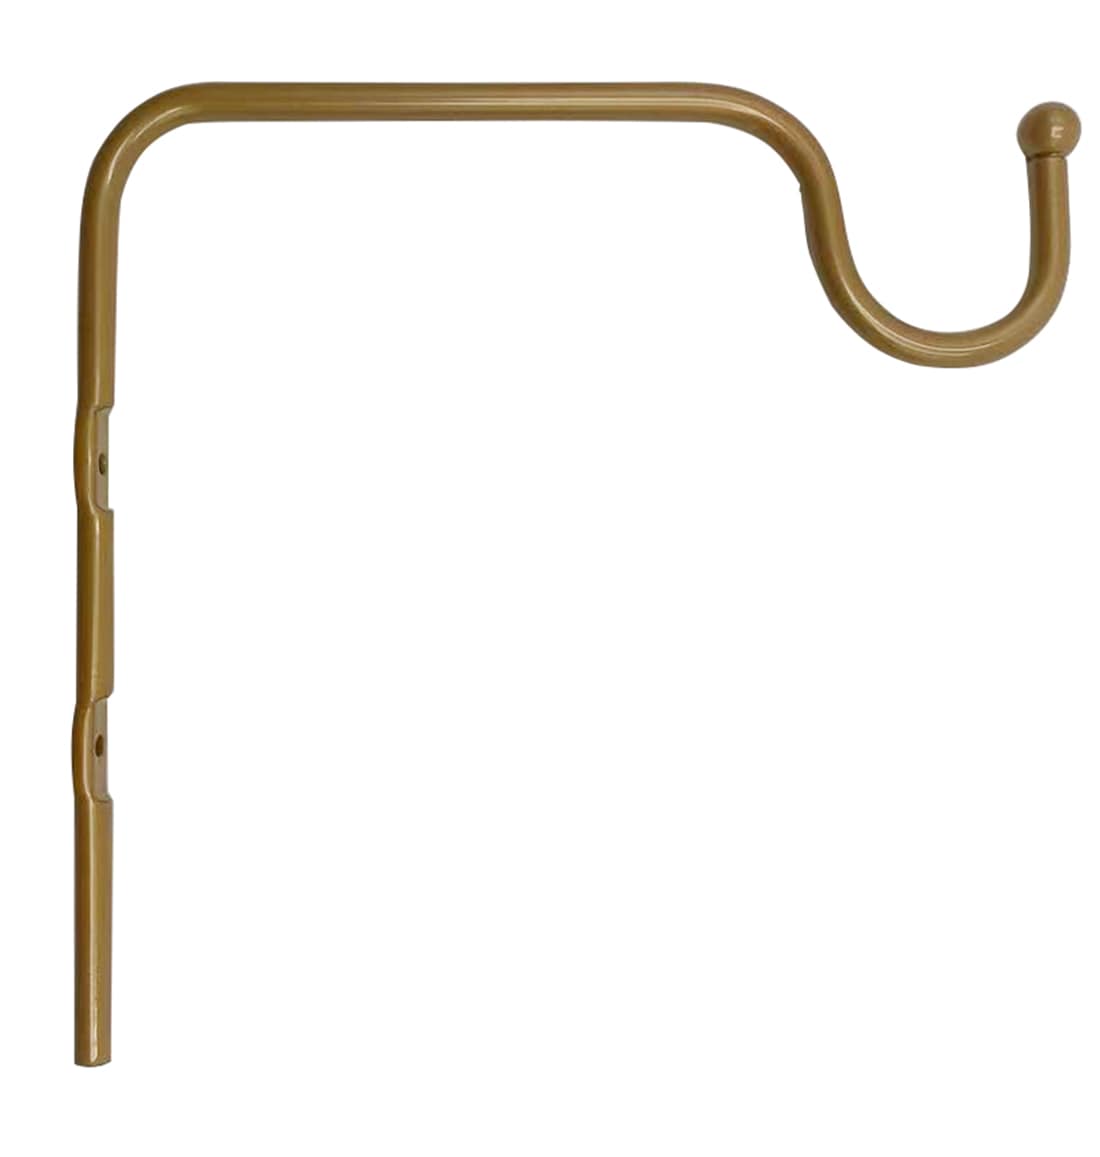 Stainless steel Plant Hooks at